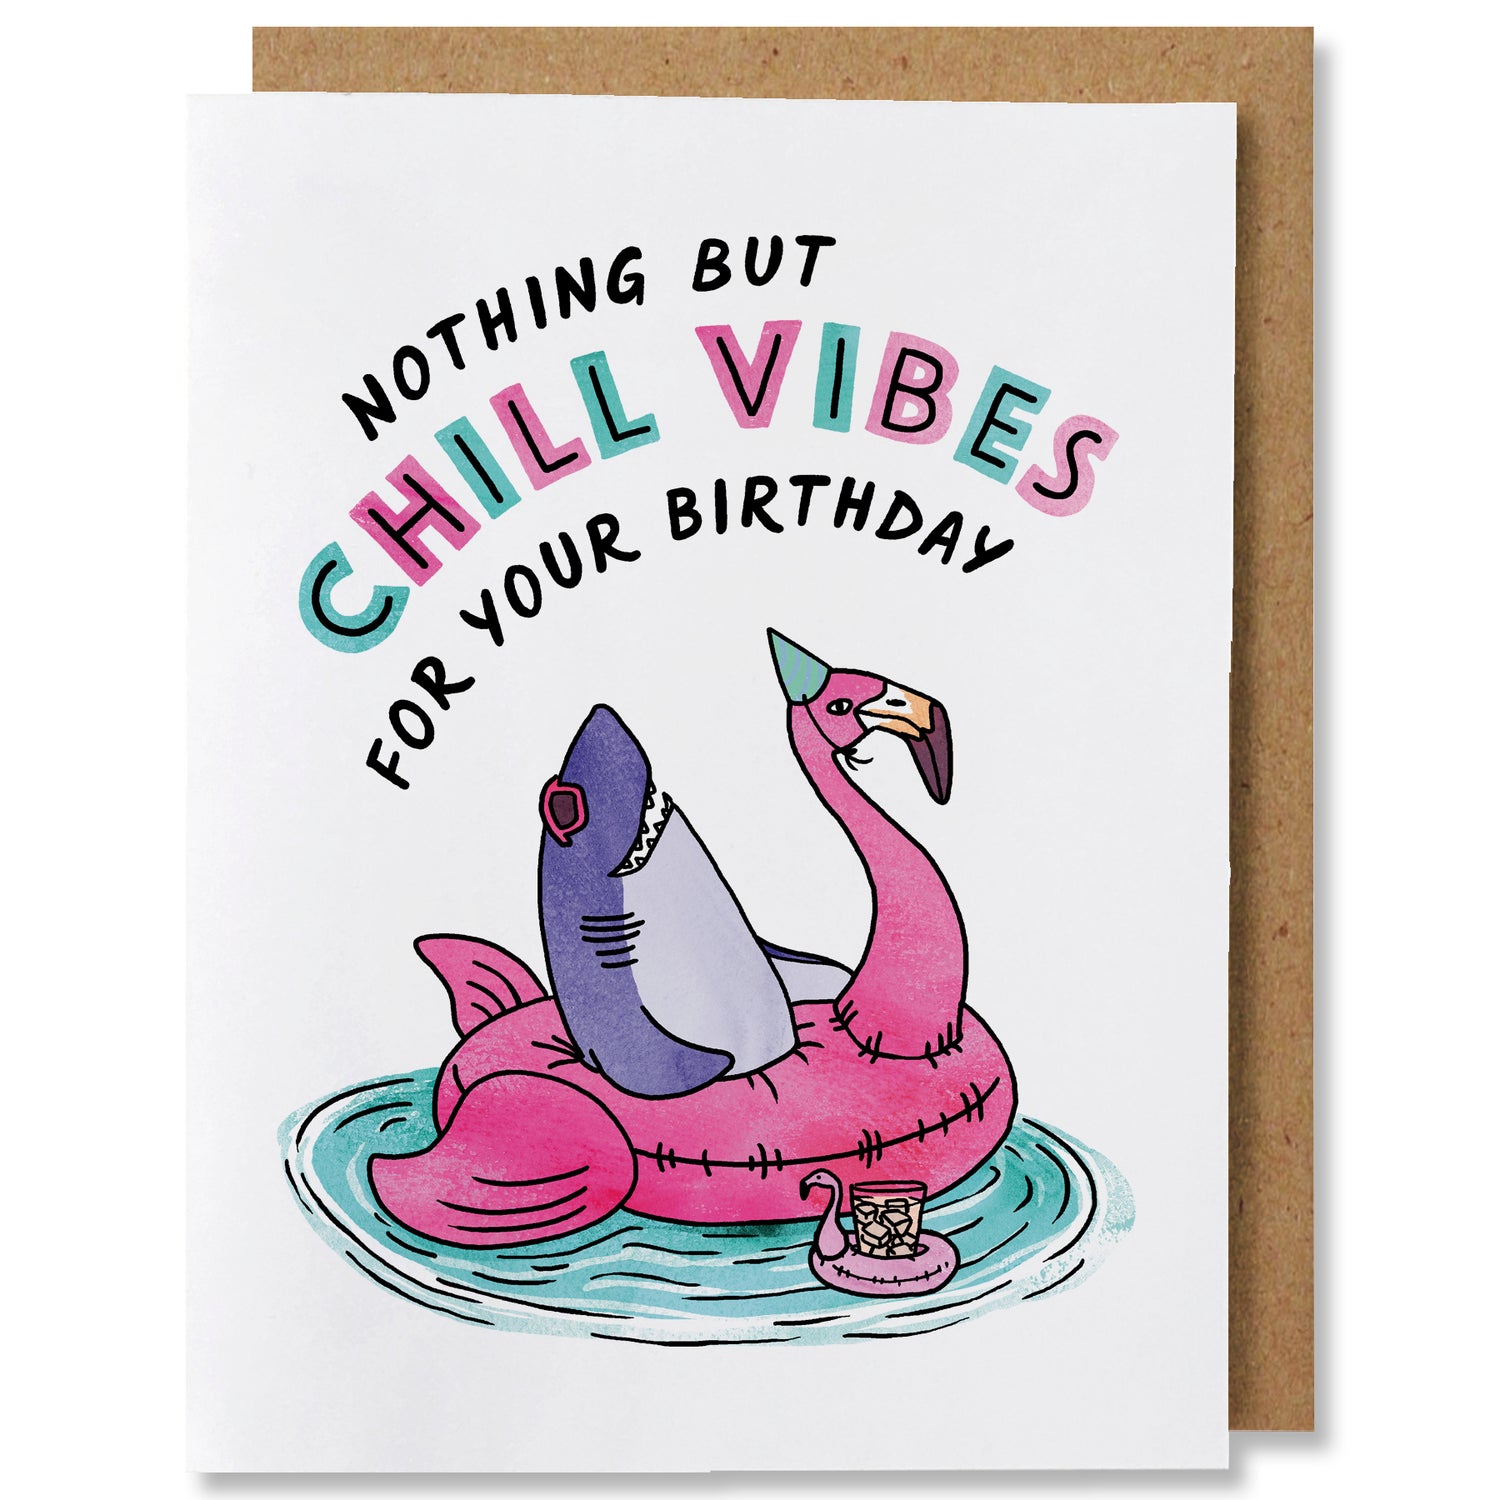 Illustrated birthday greeting card featuring a shark wearing sunglasses in a pink flamingo pool float in blue water with a cocktail in a mini pool float. Hand lettered words arch above the image saying “nothing but chill vibes for your birthday”